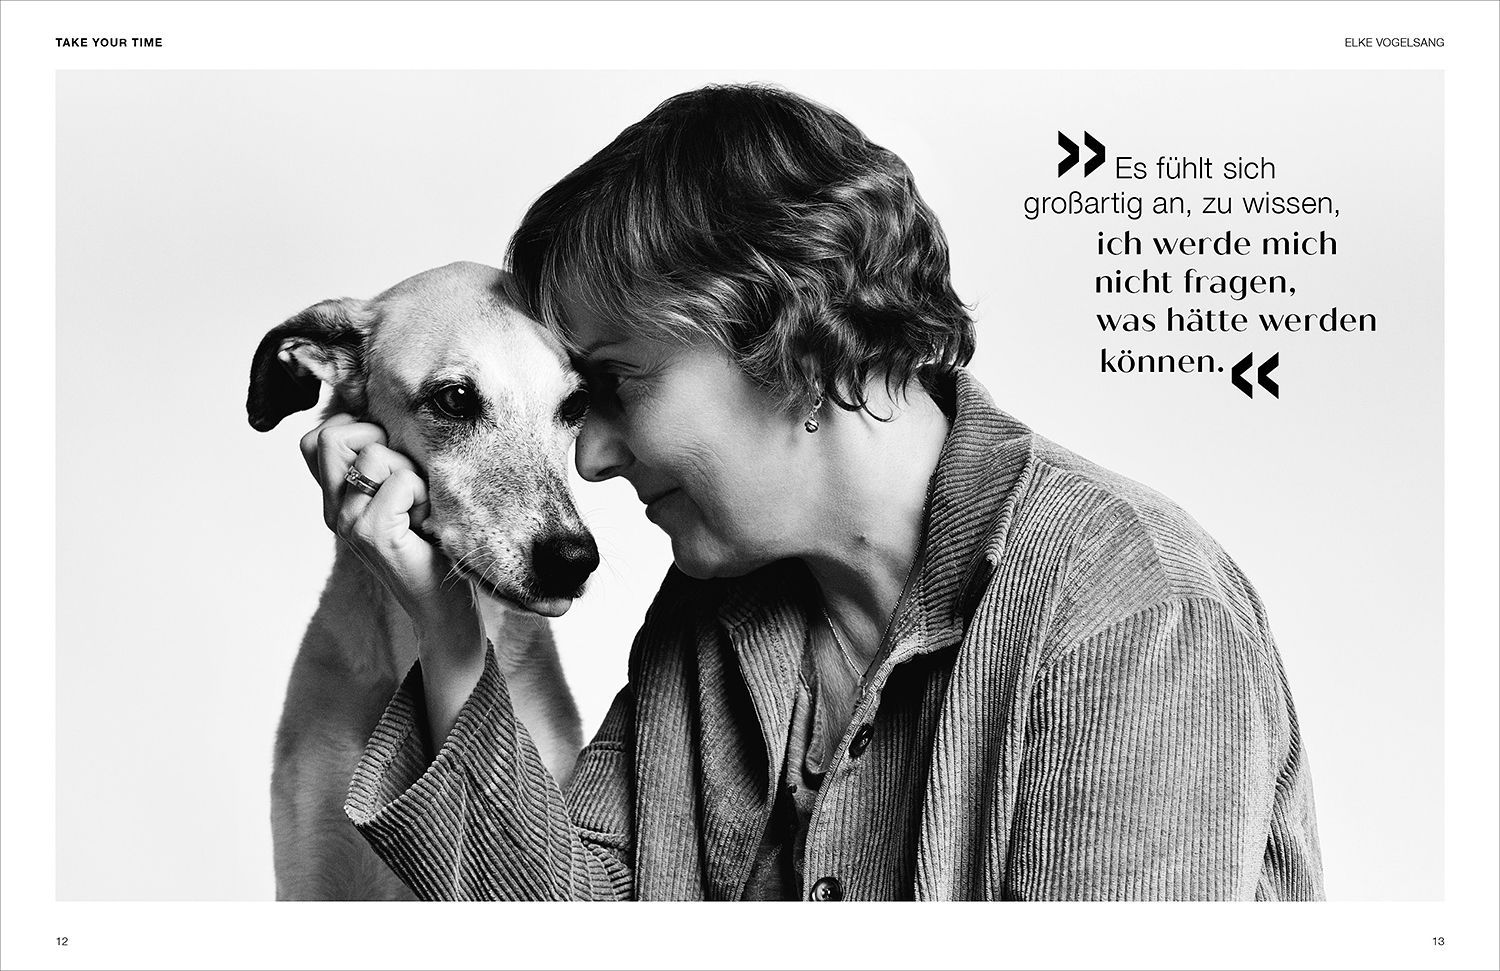 TAKE YOUR TIME Magazine pages: Elke Vogelsang with her dog Scout by Cornelia Köster